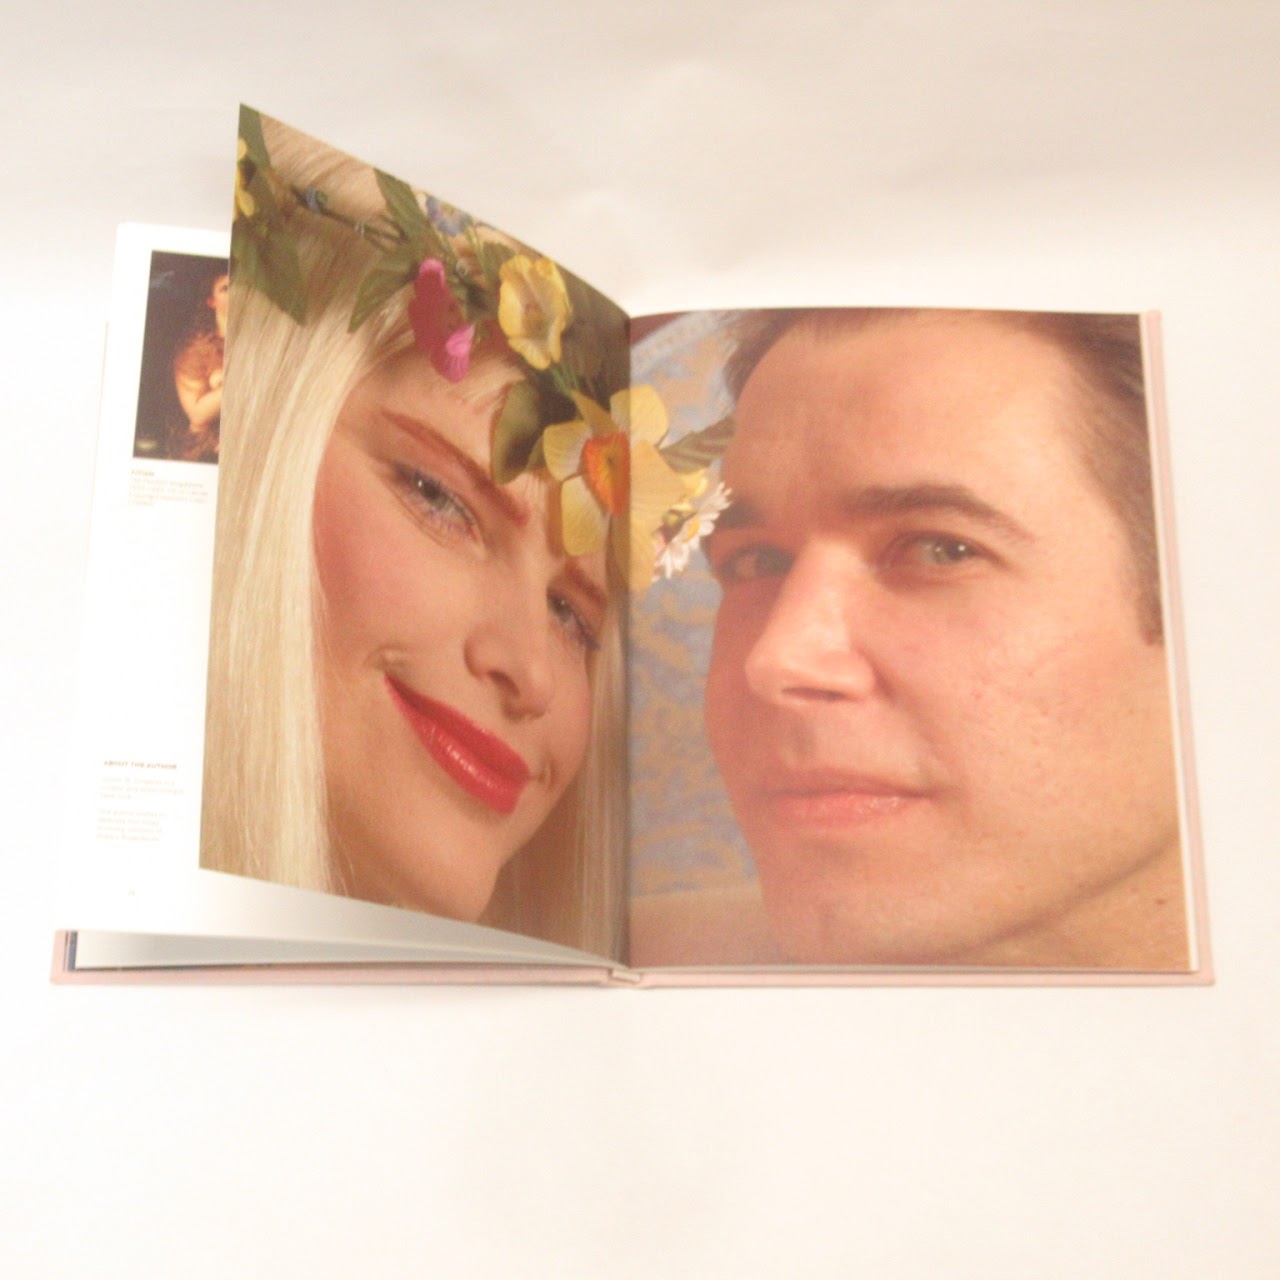 'Jeff Koons Made In Heaven Paintings' RARE Book